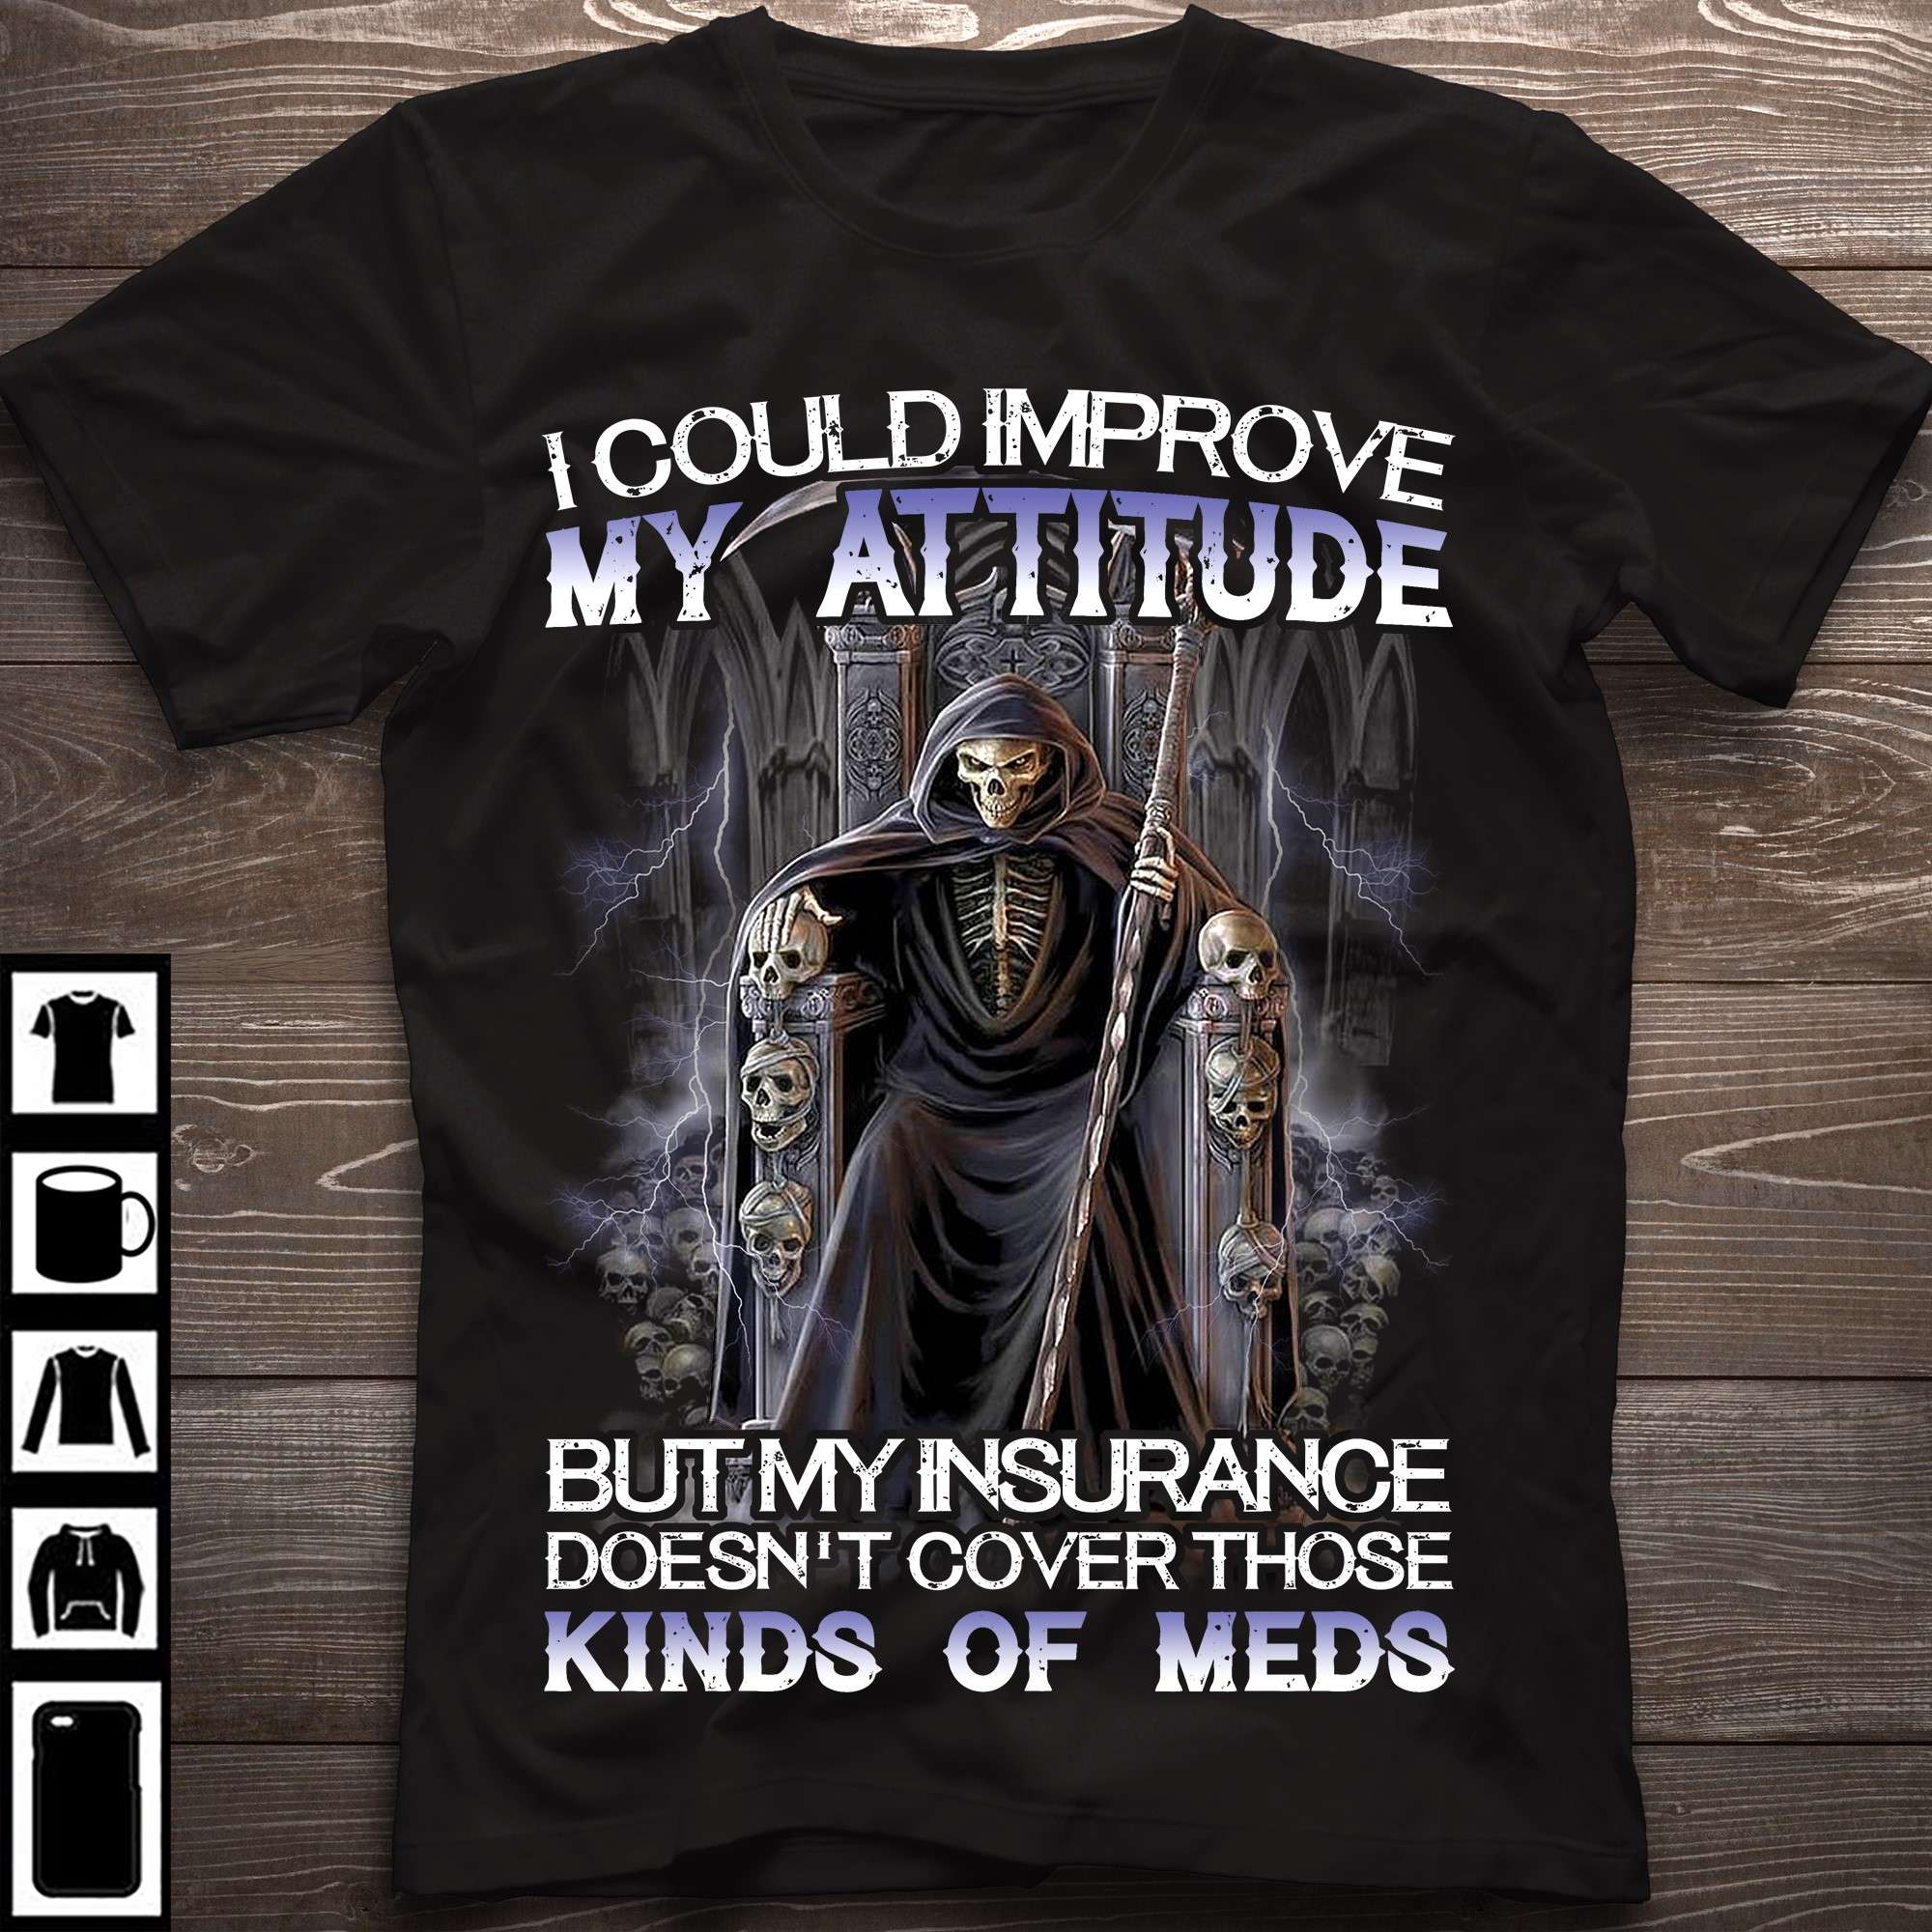 I could improve my attitude but my insurance doesn't cover those kinds of meds - Evil skull